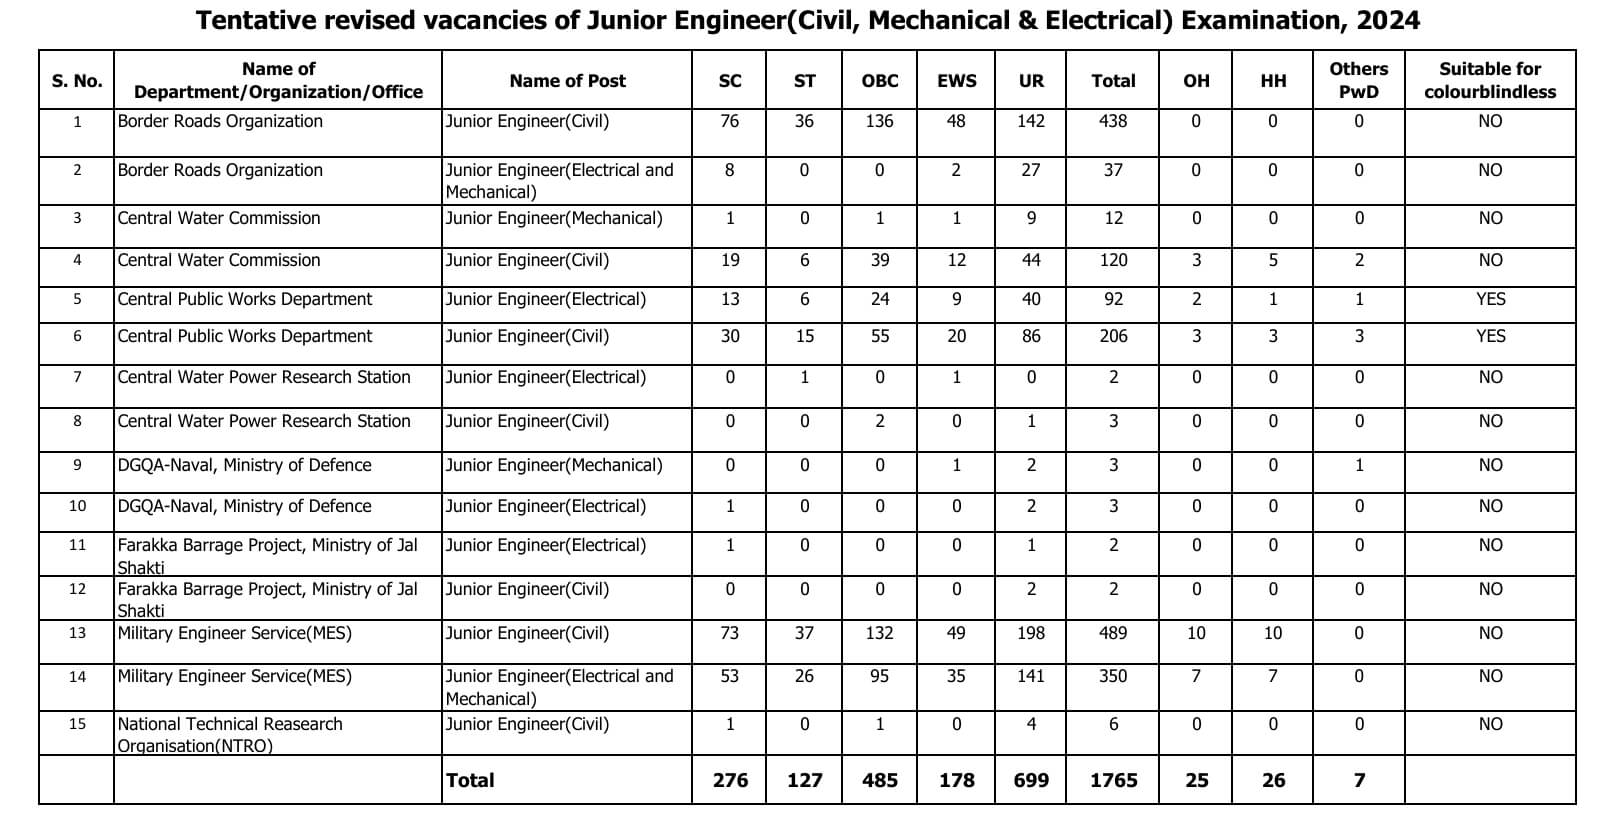 SSC JE Revised Vacancy 2024, Check Complete Details